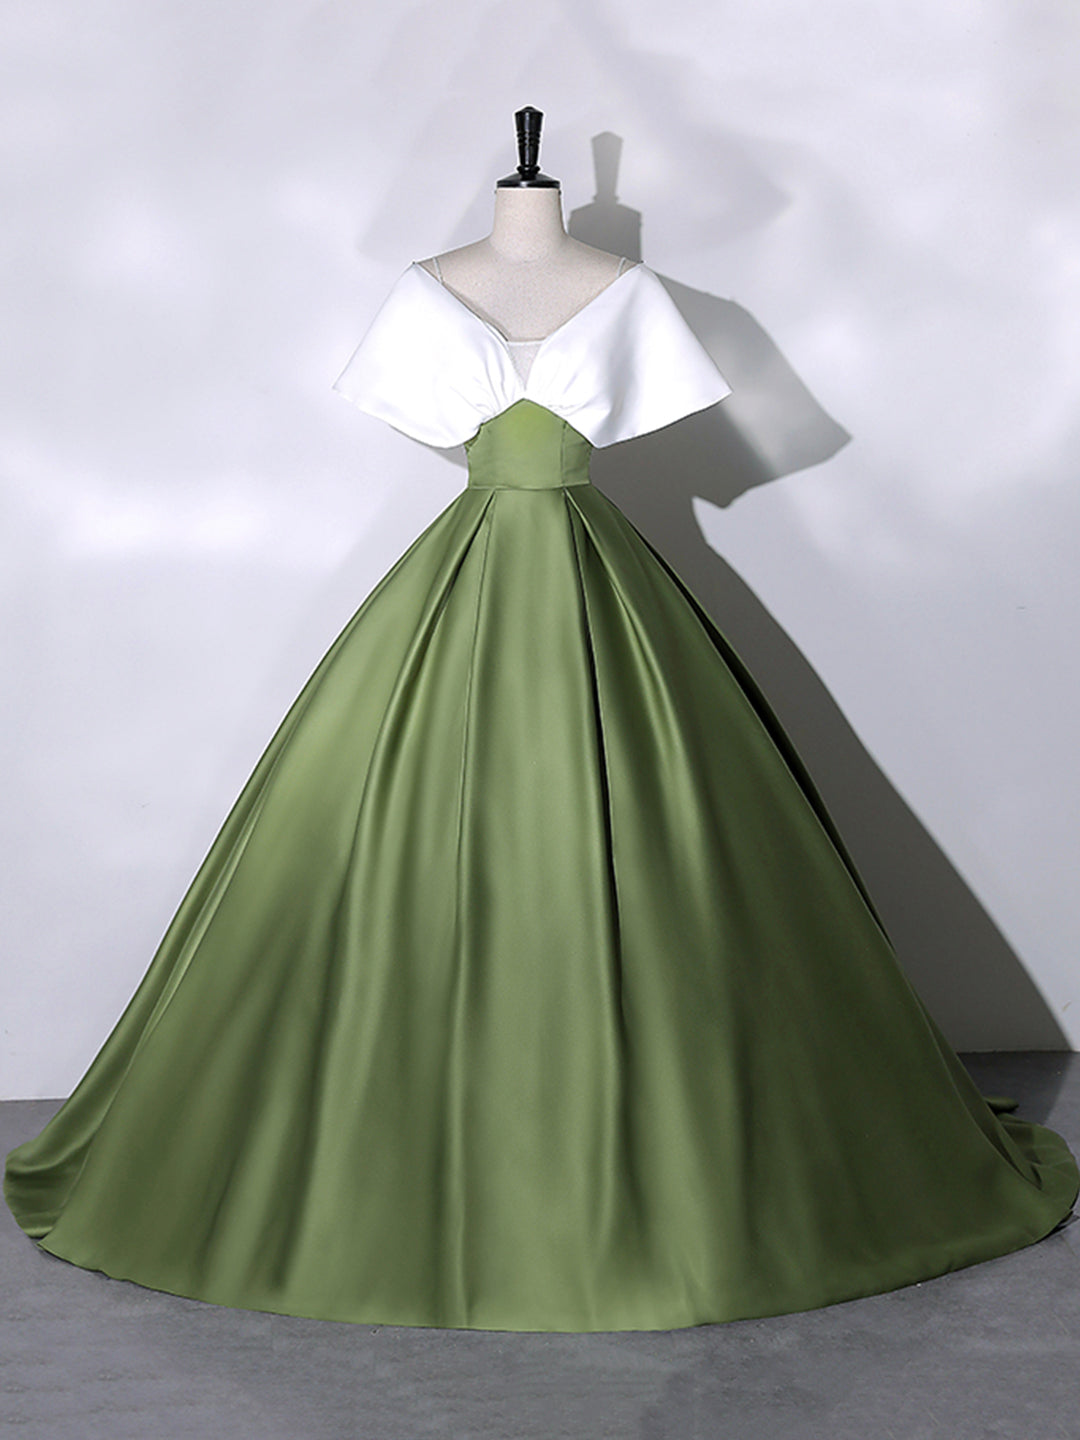 White+Green Satin Floor Length Corset Prom Dress, V-Neck Off the Shoulder Evening Dress outfit, Party Dress Long Sleeve Maxi